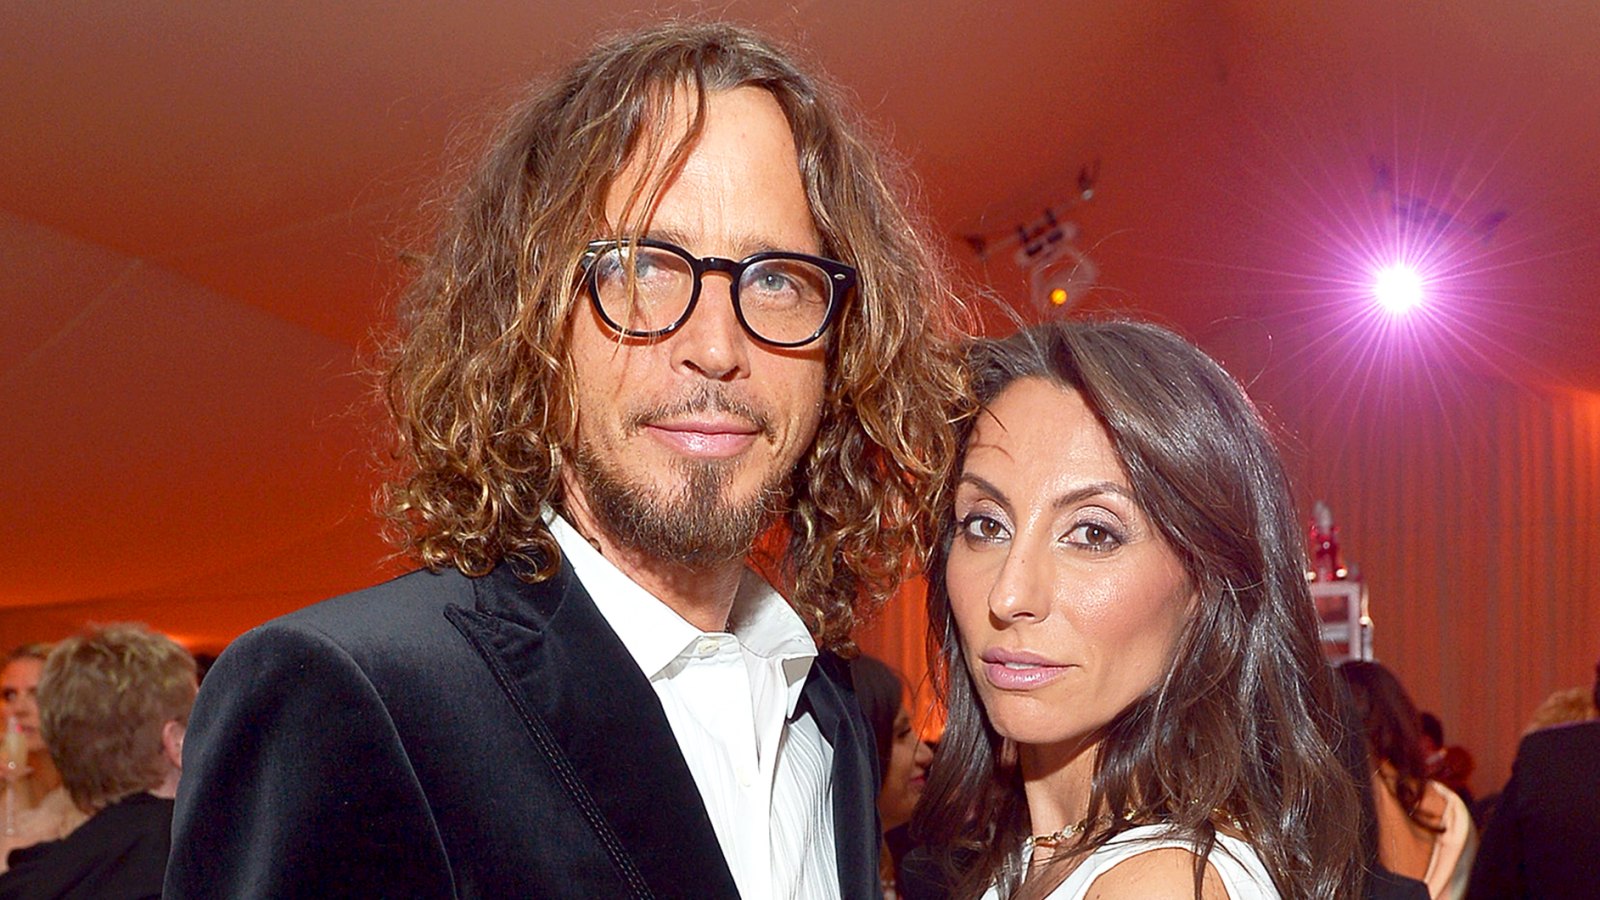 Chris Cornell and Vicky attend Neuro at 21st Annual Elton John AIDS Foundation Academy Awards Viewing Party at West Hollywood Park in West Hollywood, California.